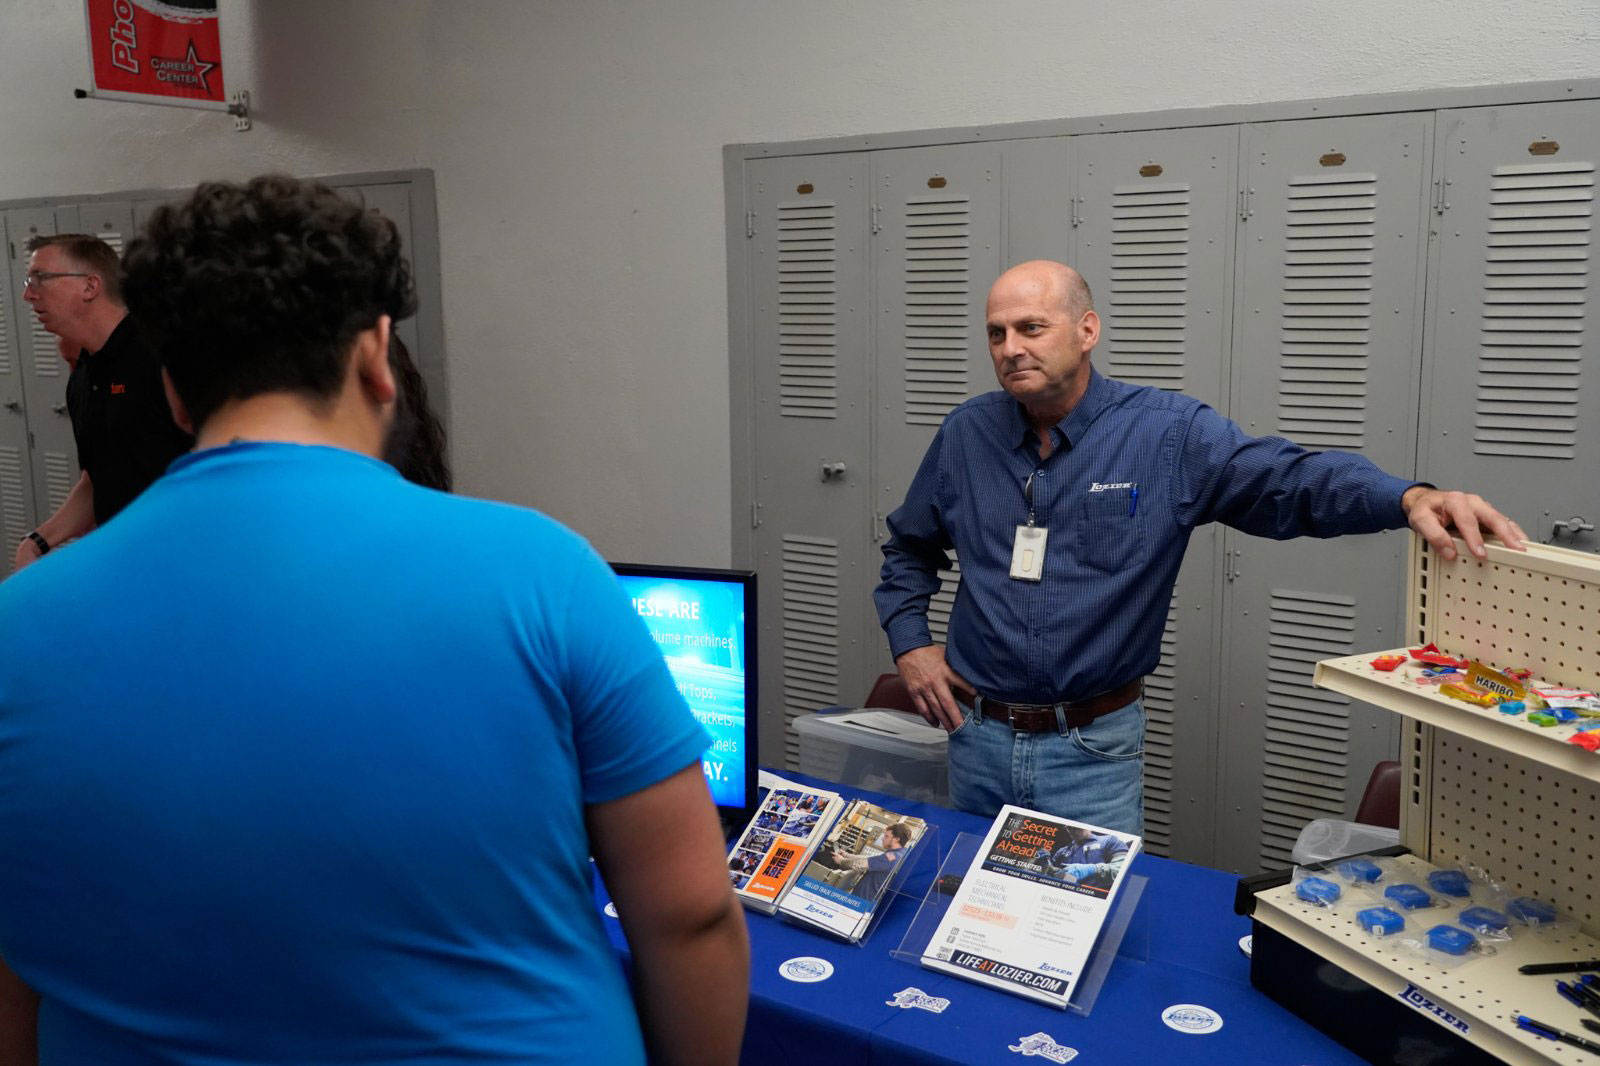 Lozier promotes Skilled Trades opportunities to Omaha Public Schools’ career-minded students